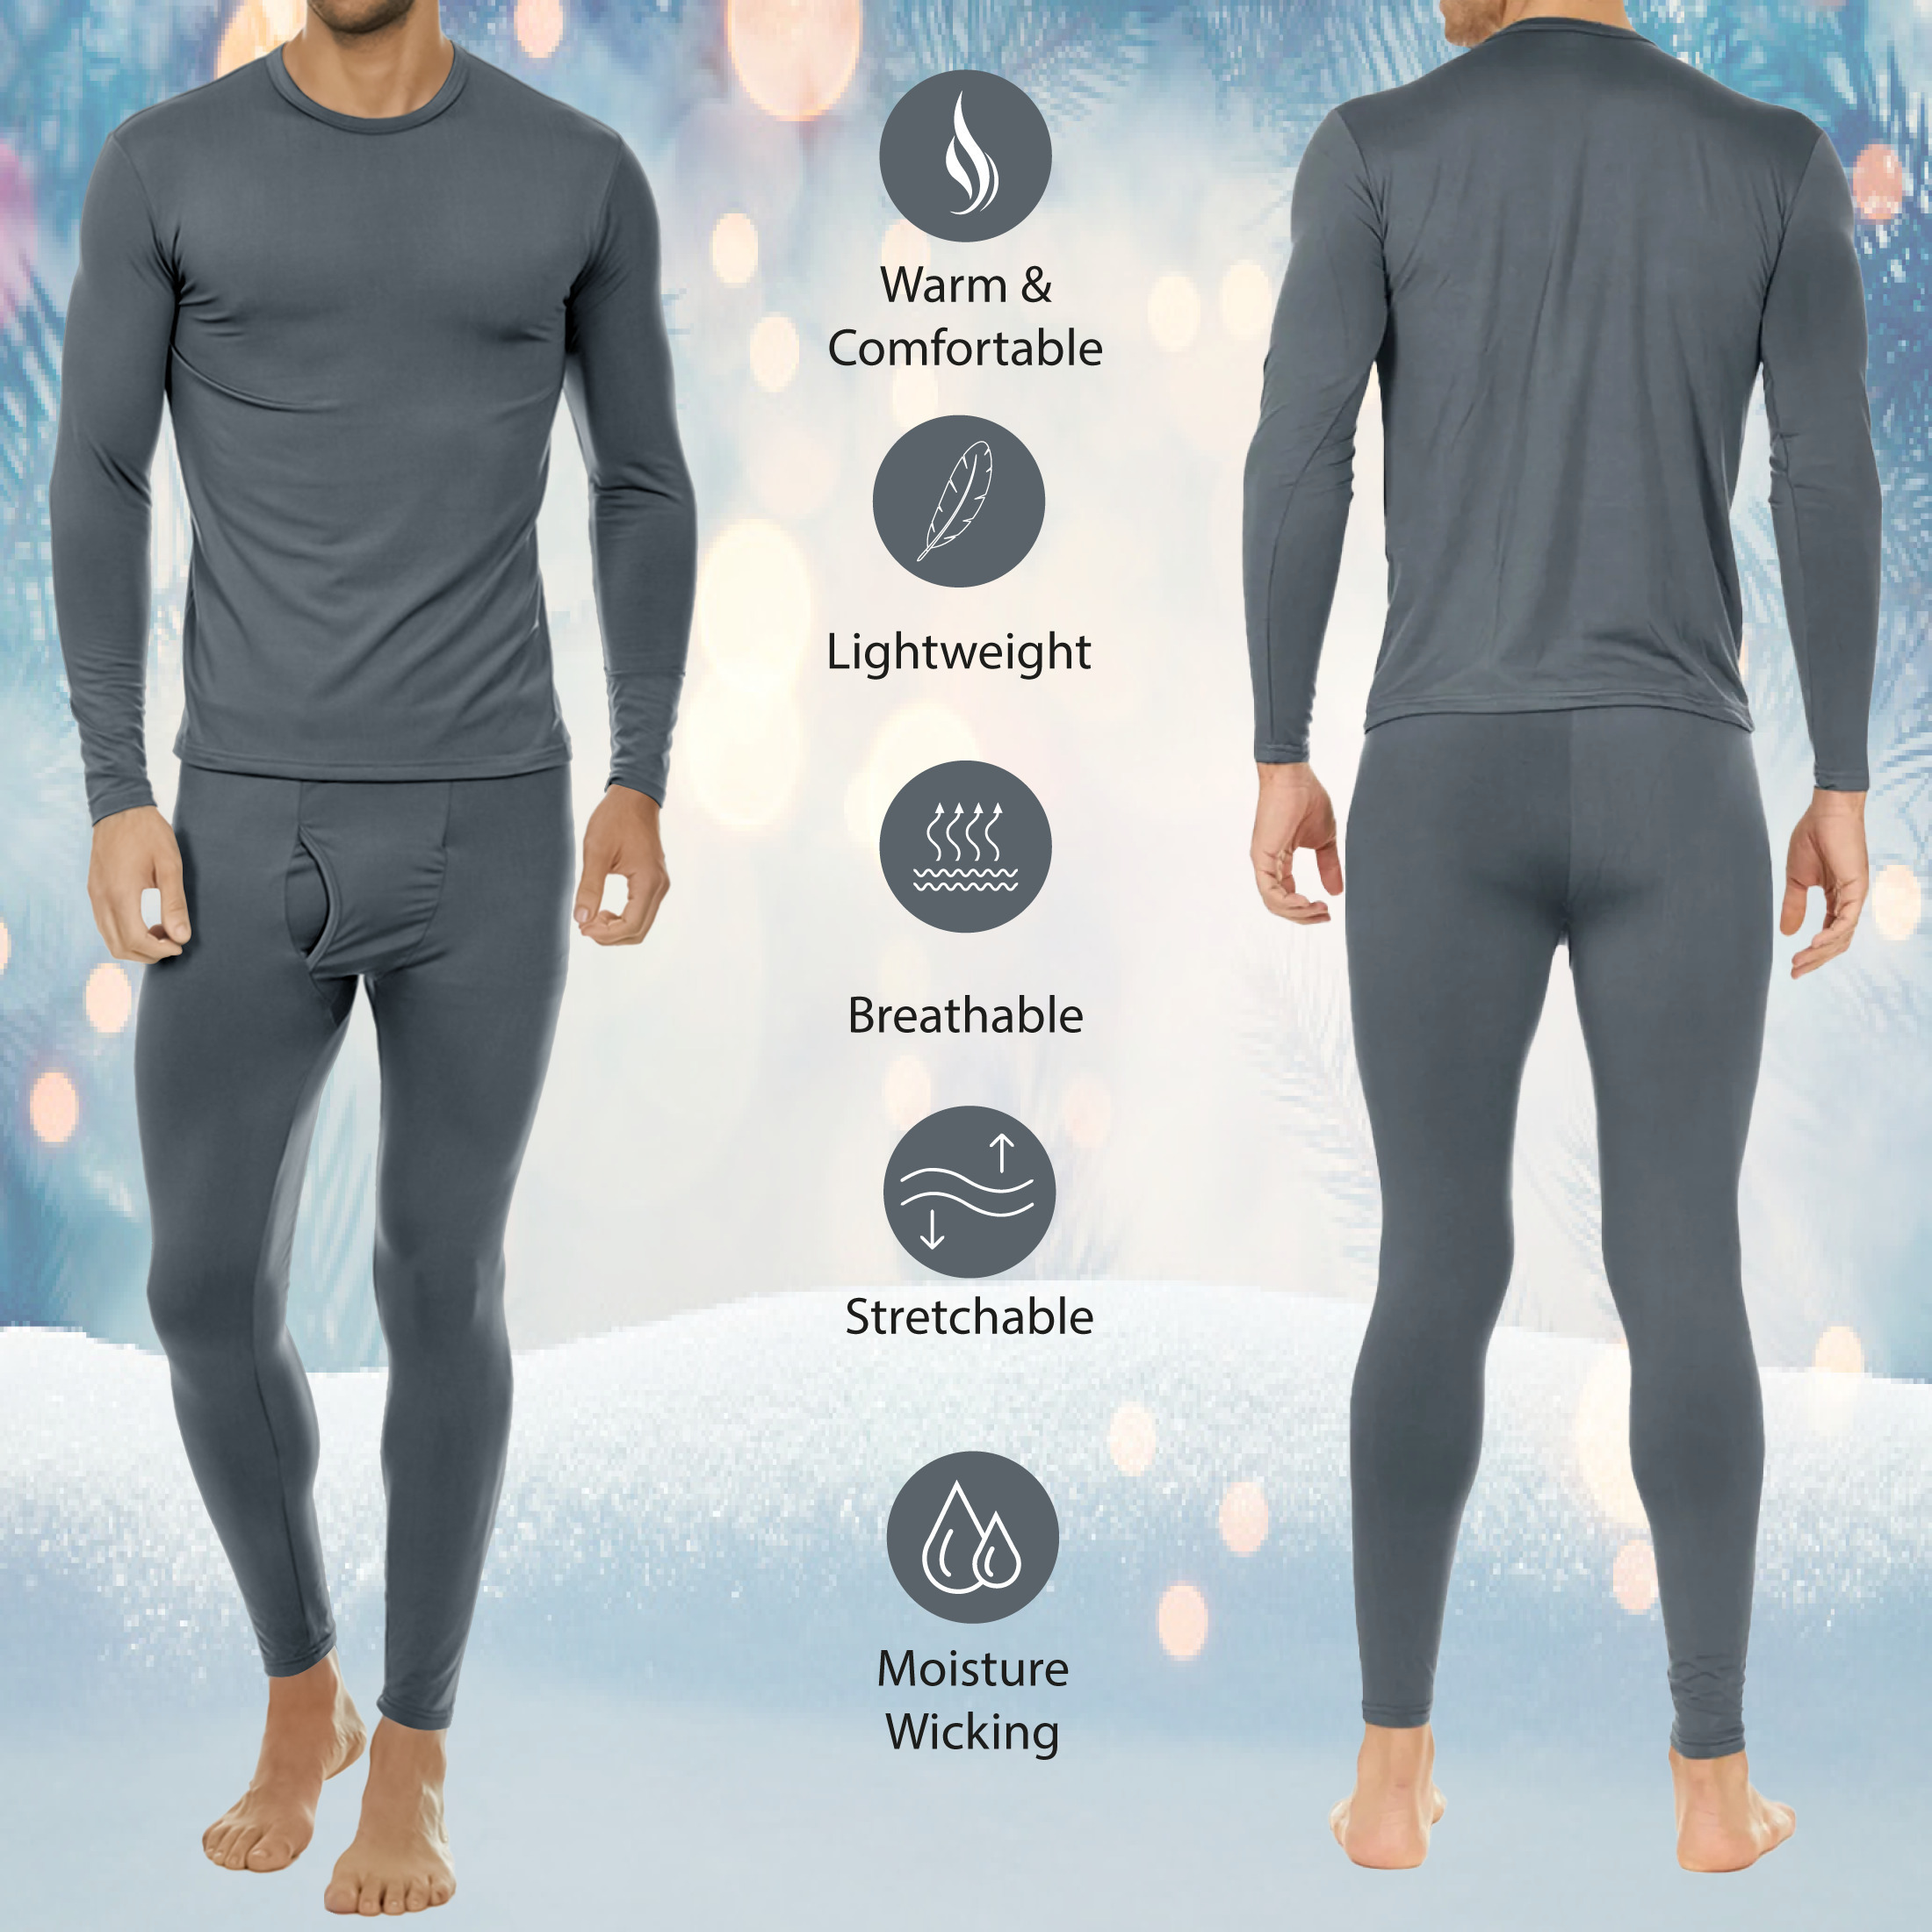 4-Piece: Men's Fleece Lined Thermal Set For Cold Weather - Medium